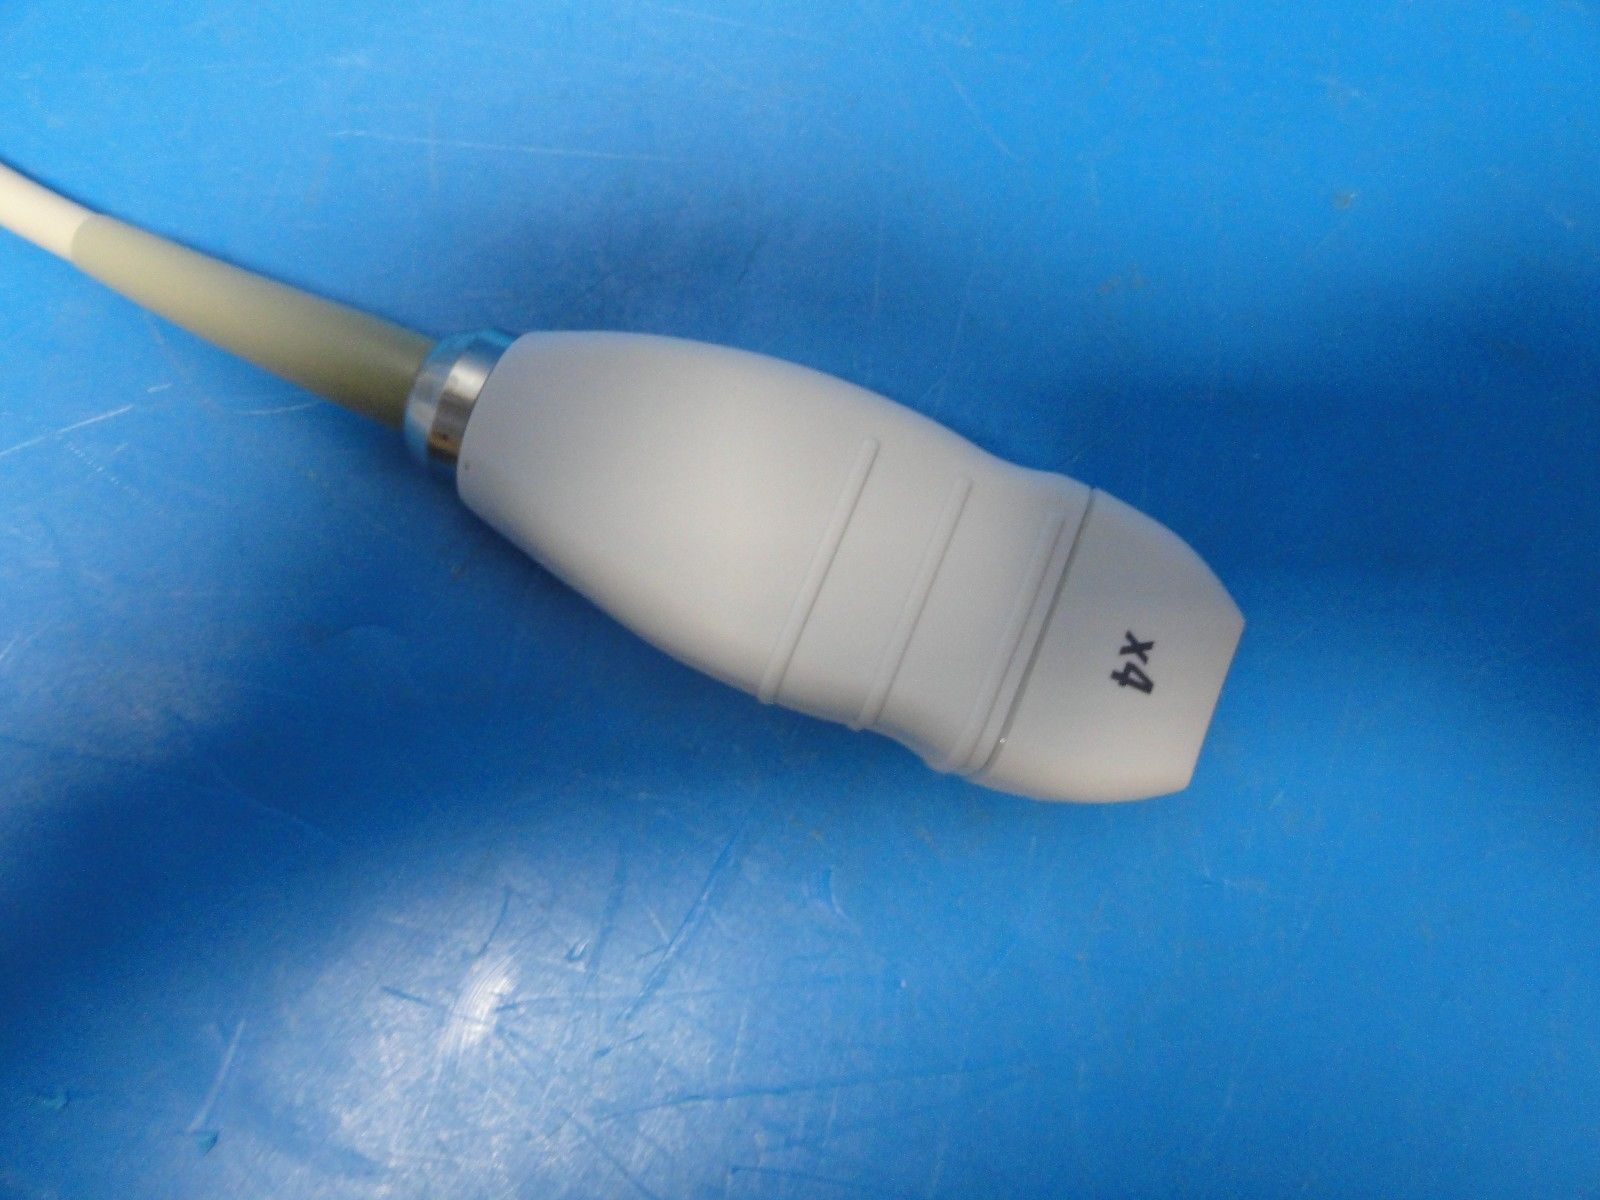 2004 Philips  X4 / 21315A  xMatrix Phased Array Probe for HP SONOS 7500 (8350) DIAGNOSTIC ULTRASOUND MACHINES FOR SALE